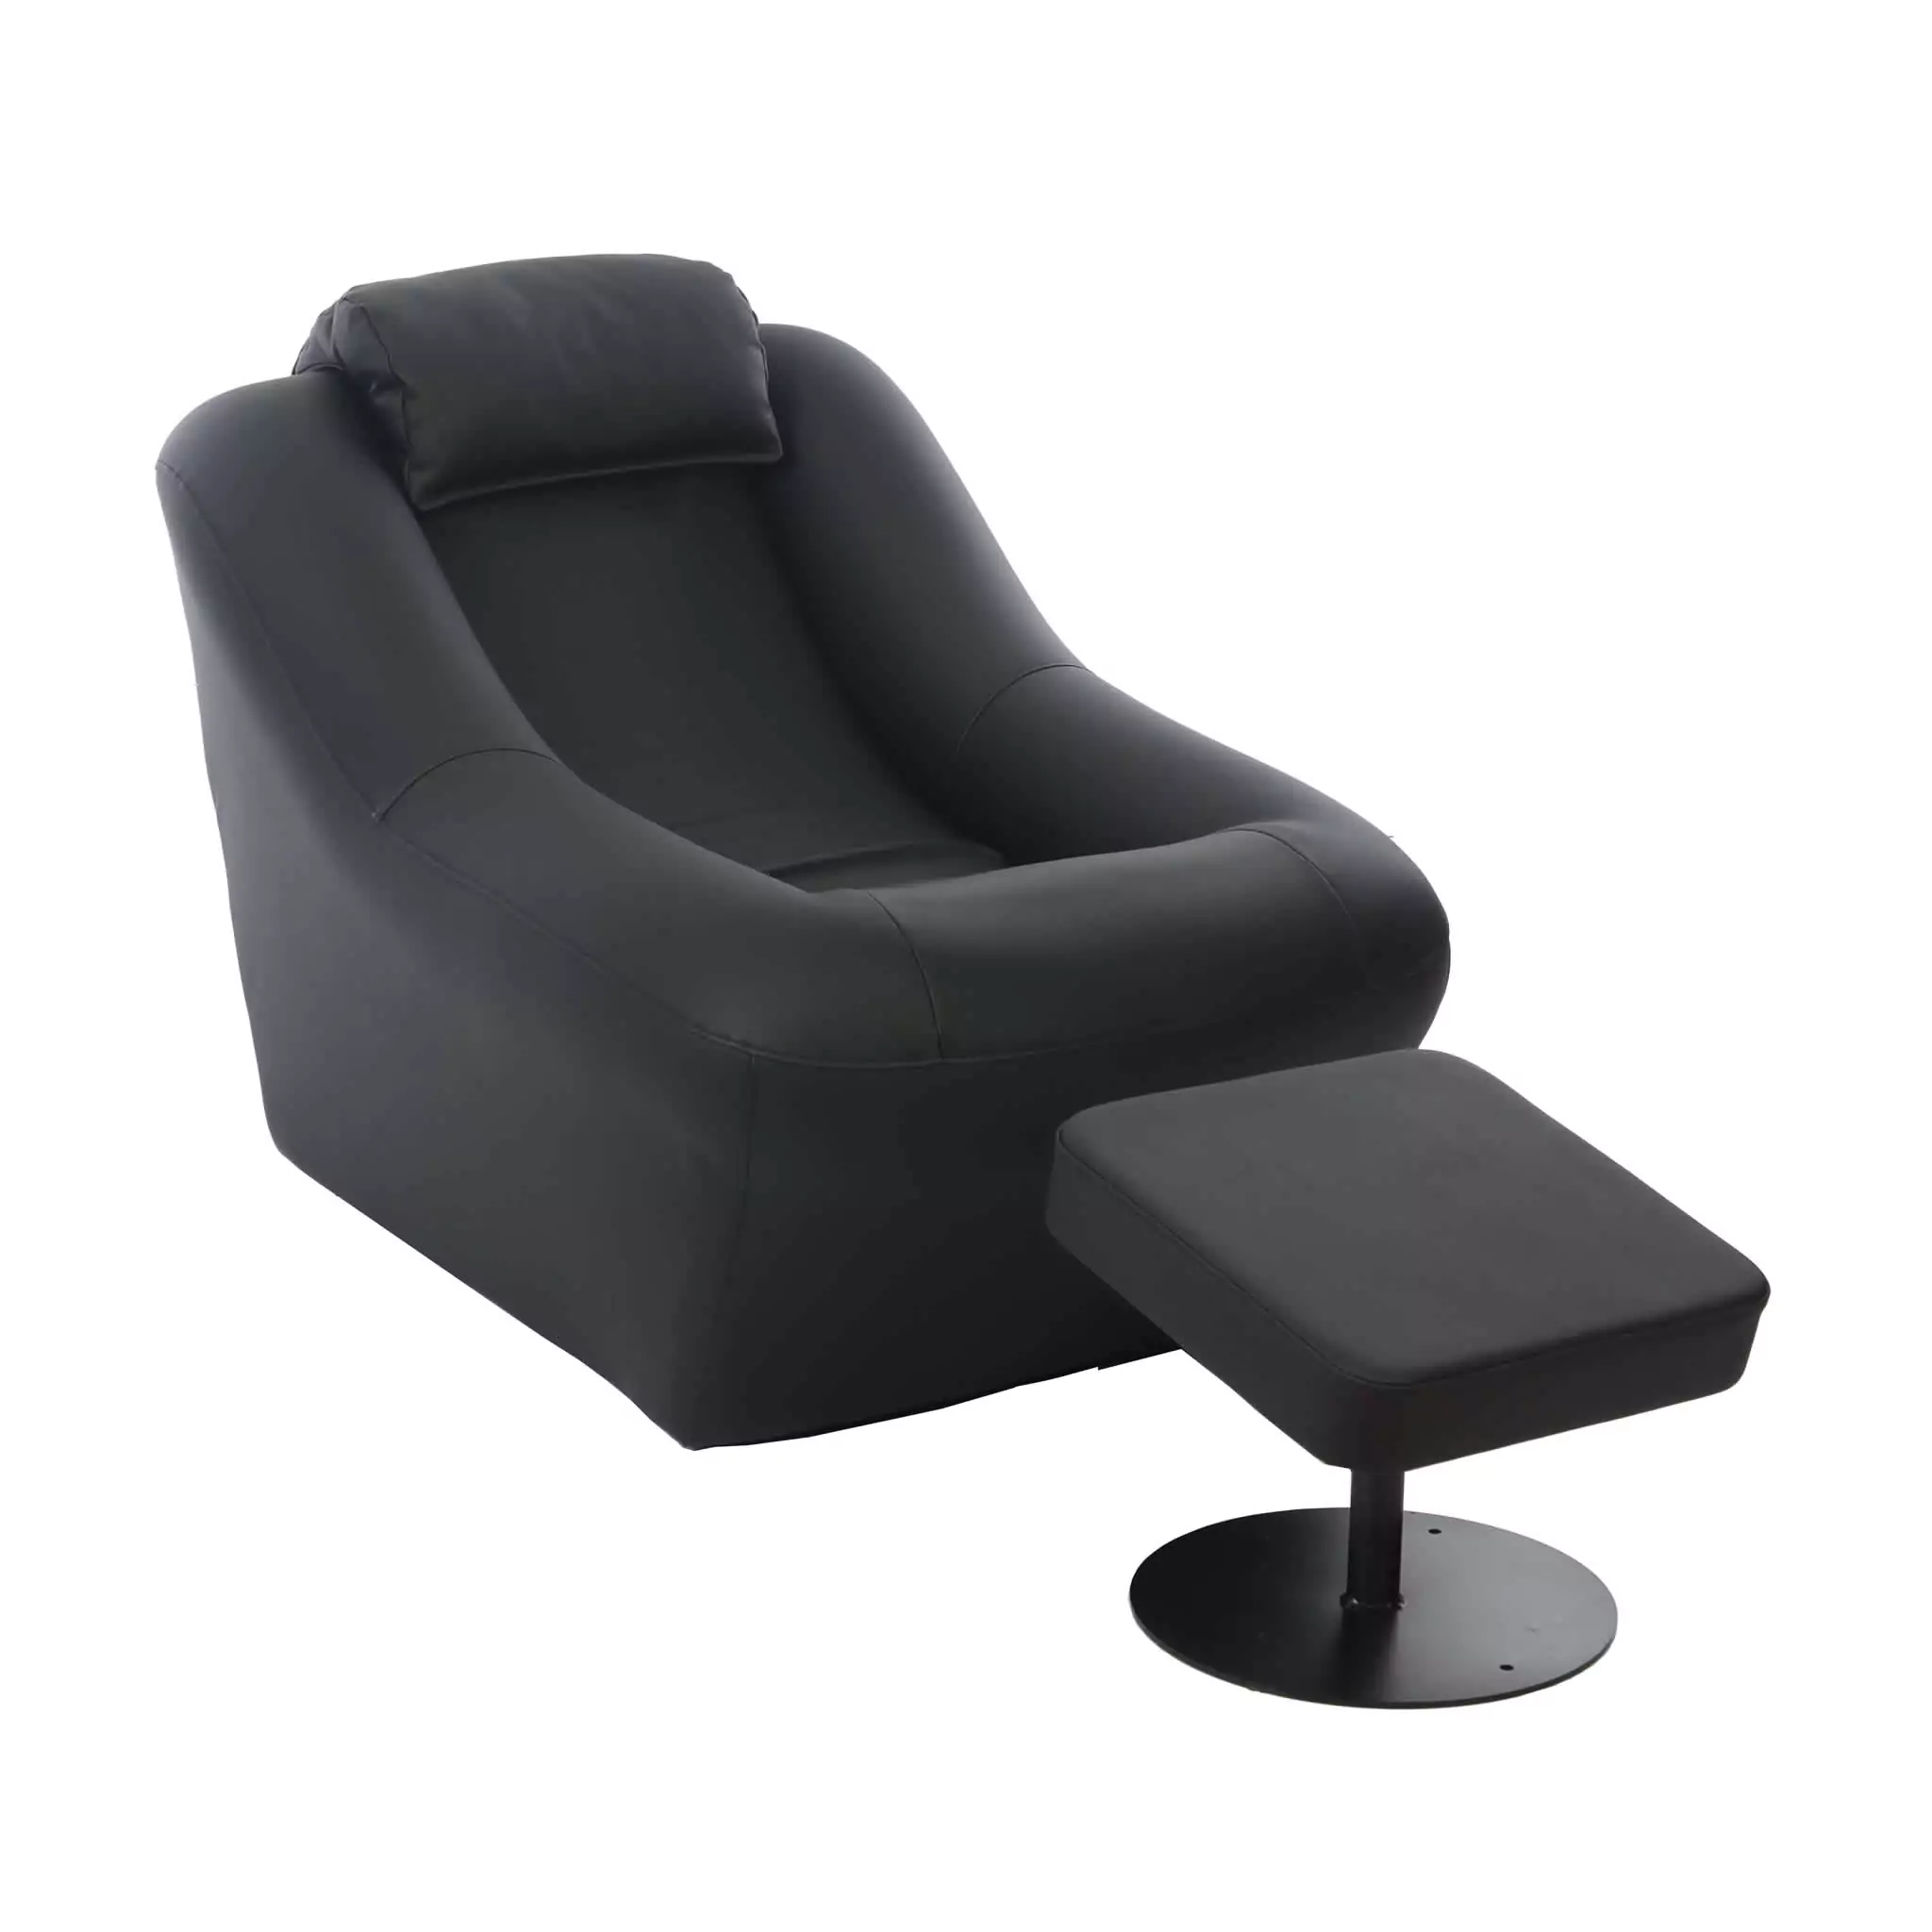 Simko Seating Product Foyer Seat Model 2